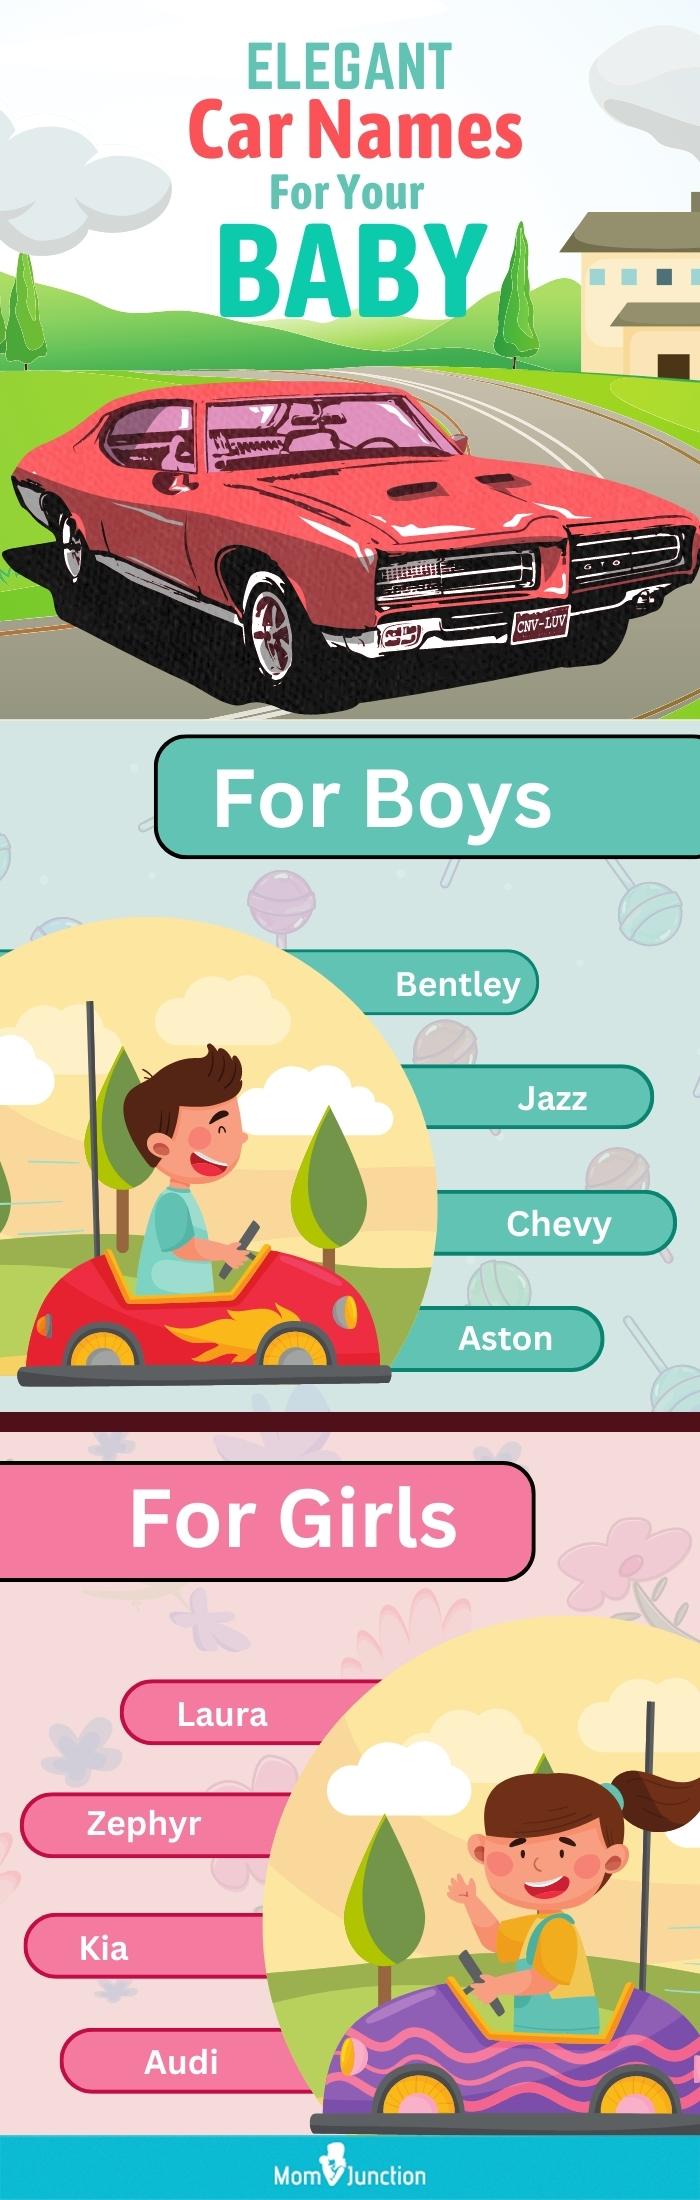 elegant car names for your baby